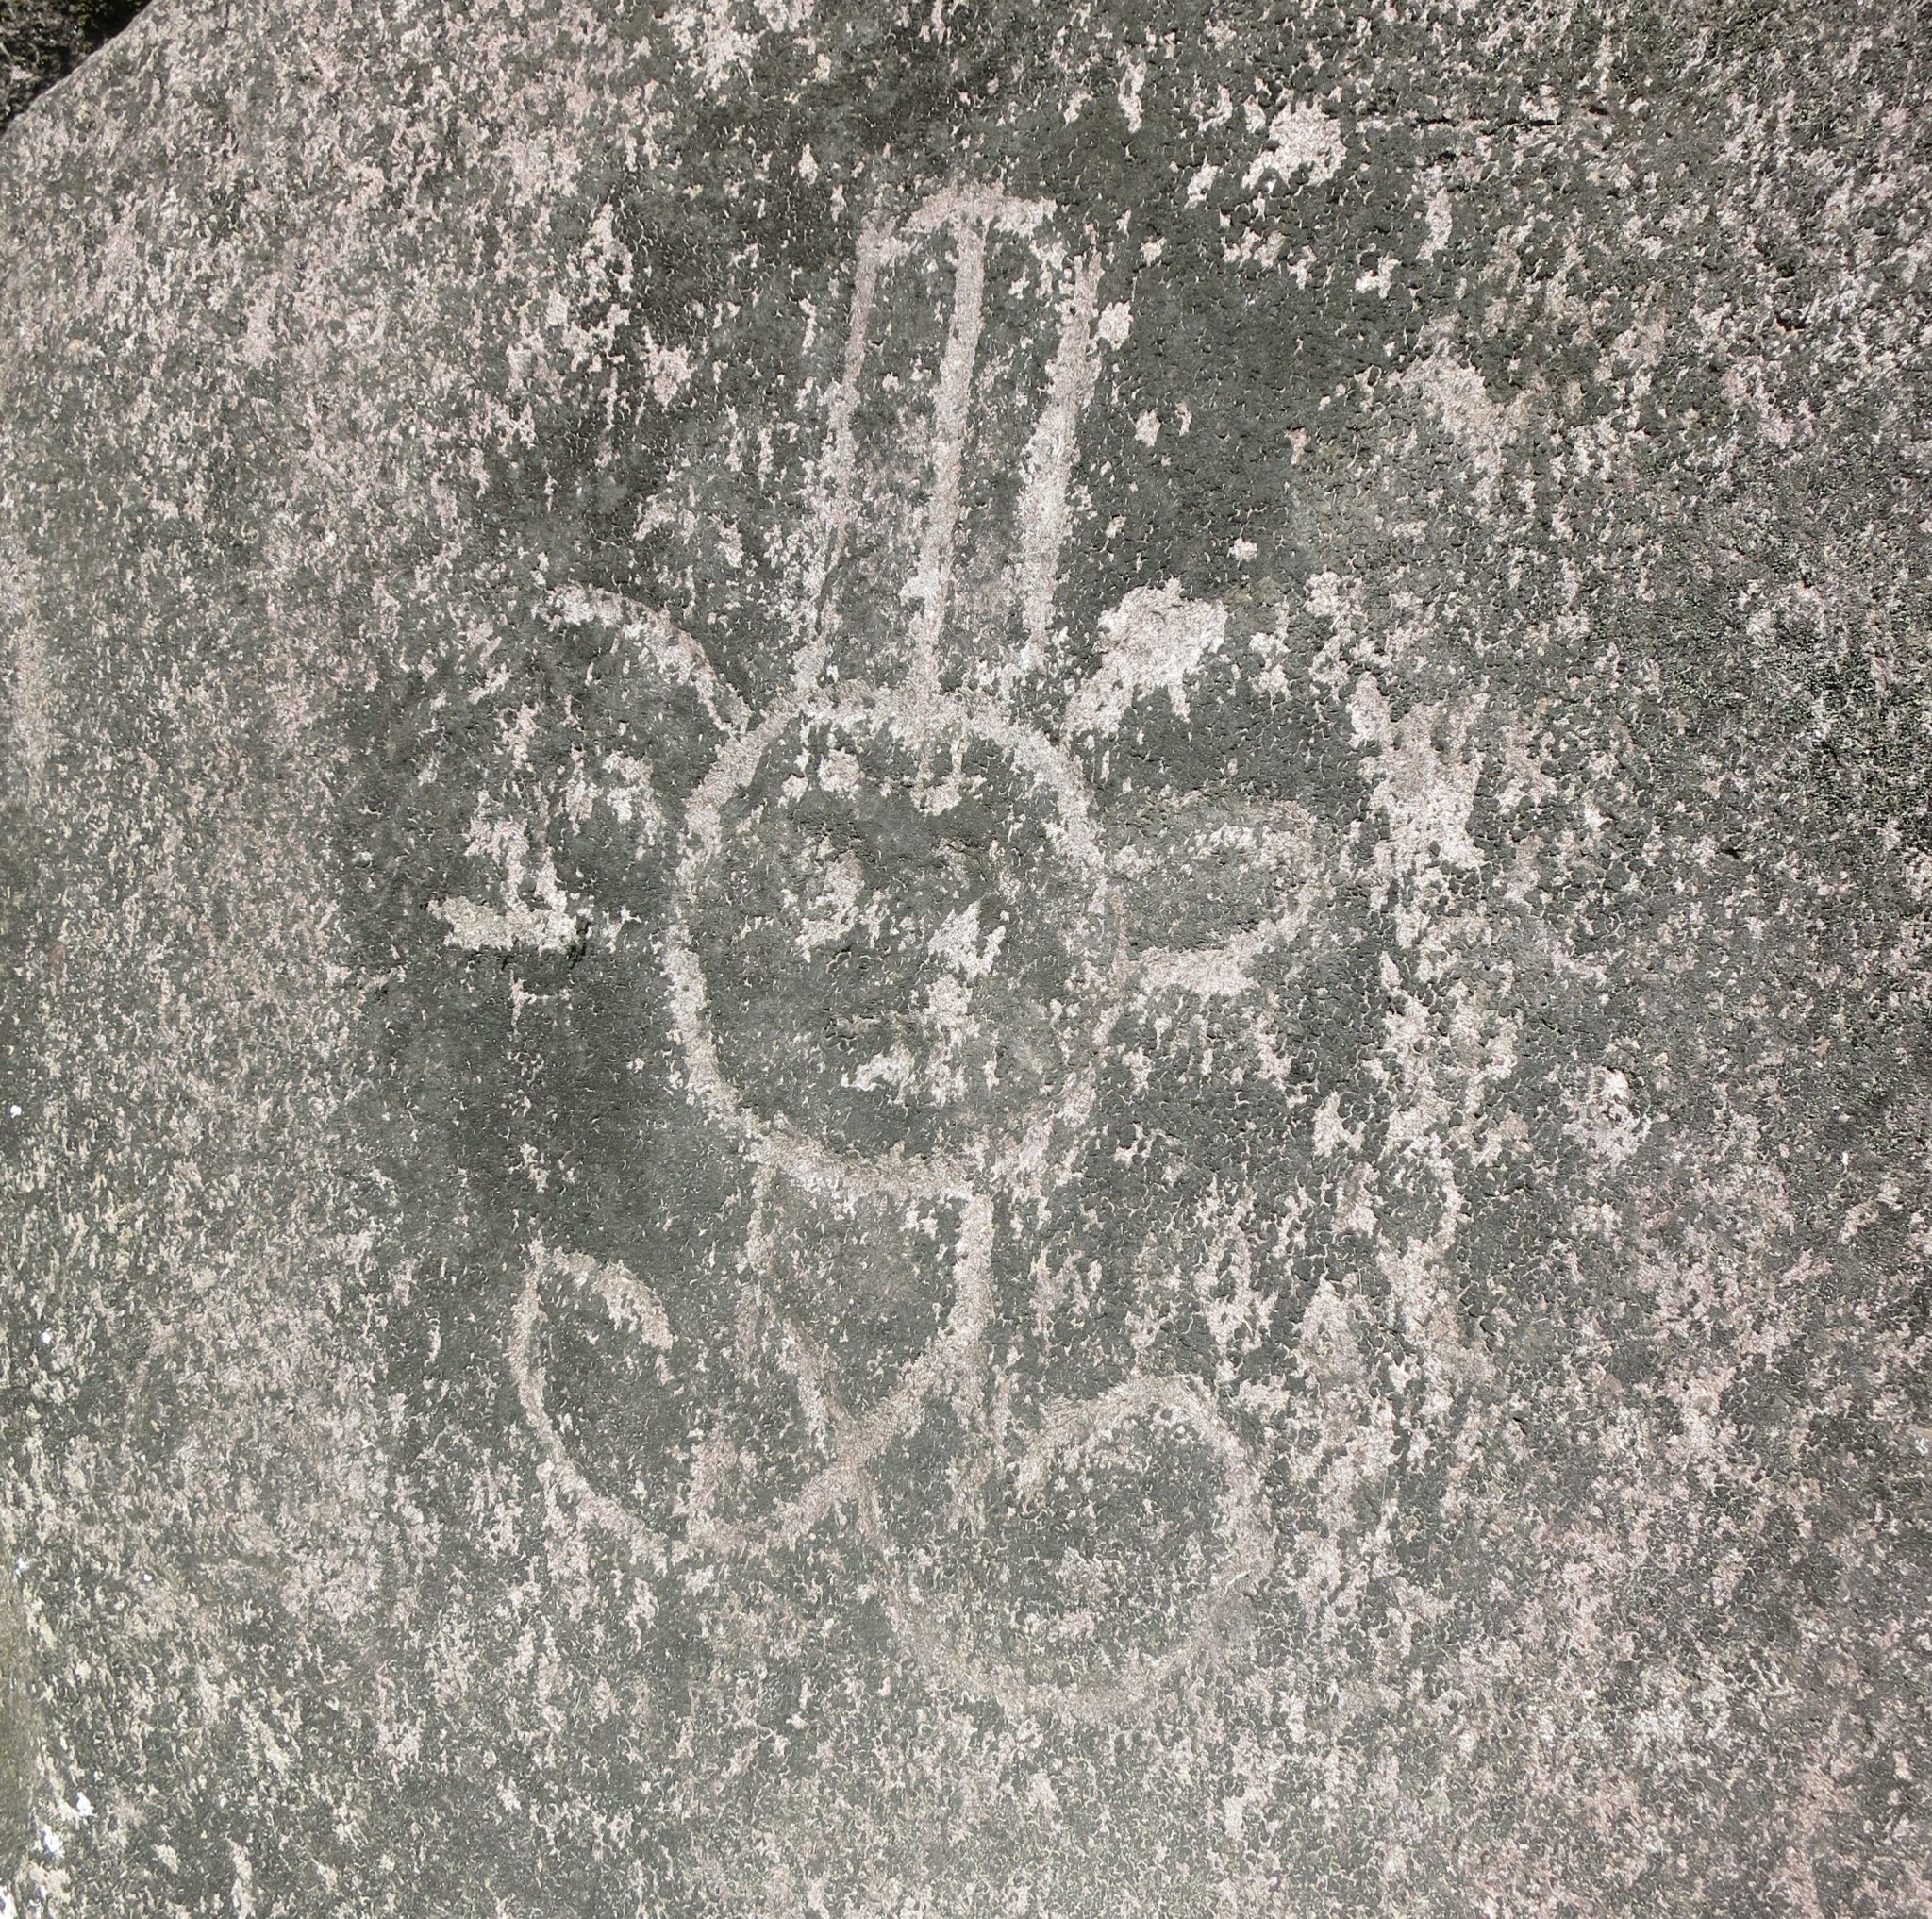 a clearer rock carving in Guadeloupe